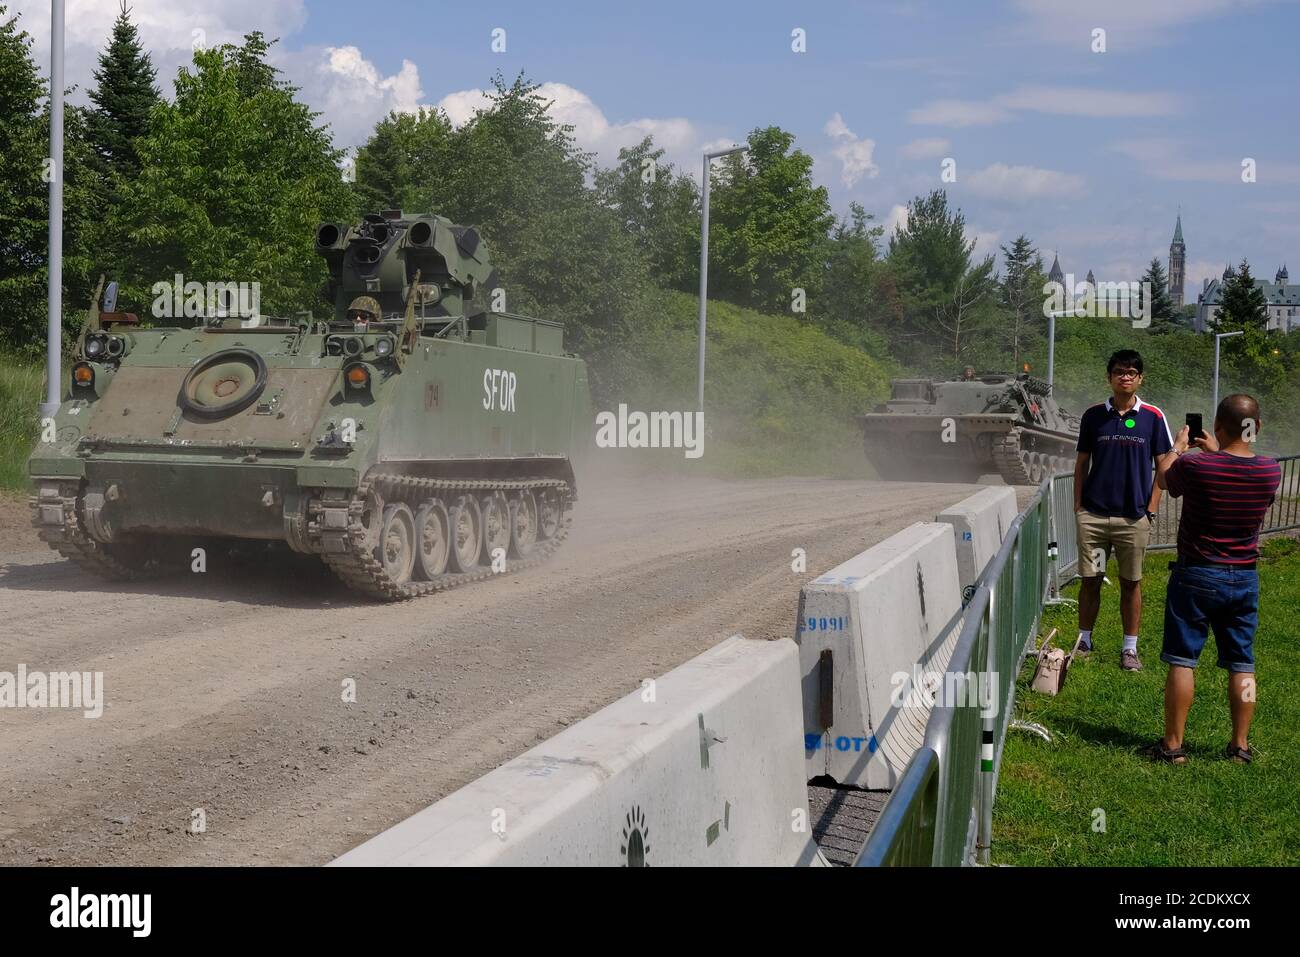 Small (COVID restricted) crowds at the free military vehicle demonstration at the Canadian War Museum, Ottawa, Ontario, Canada. Stock Photo